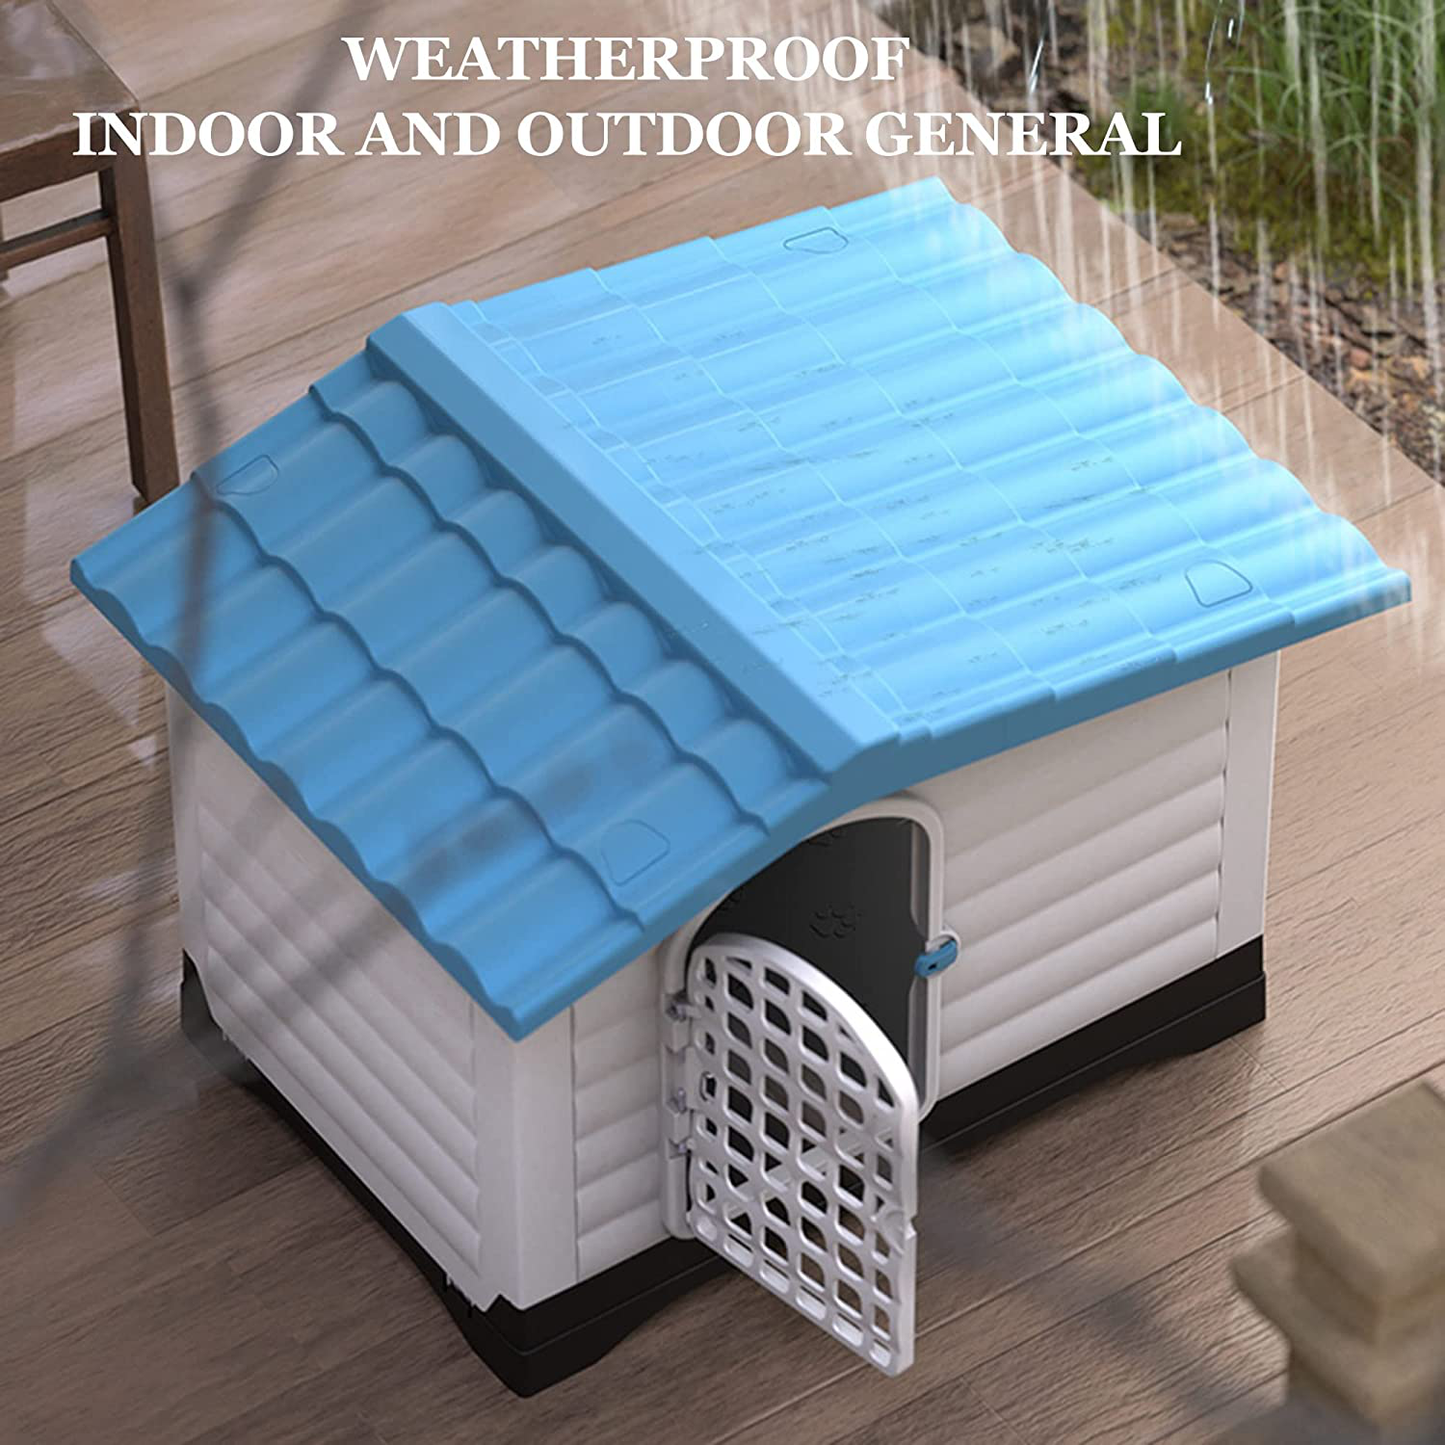 WEIE Plastic Dog Houses, Indoor Outdoor Waterproof Dog Kennel,Insulated Dog House for Small Medium Large Dogs, Easy to Assemble, No Tools Required for Assembly Animals & Pet Supplies > Pet Supplies > Dog Supplies > Dog Houses WEIE   